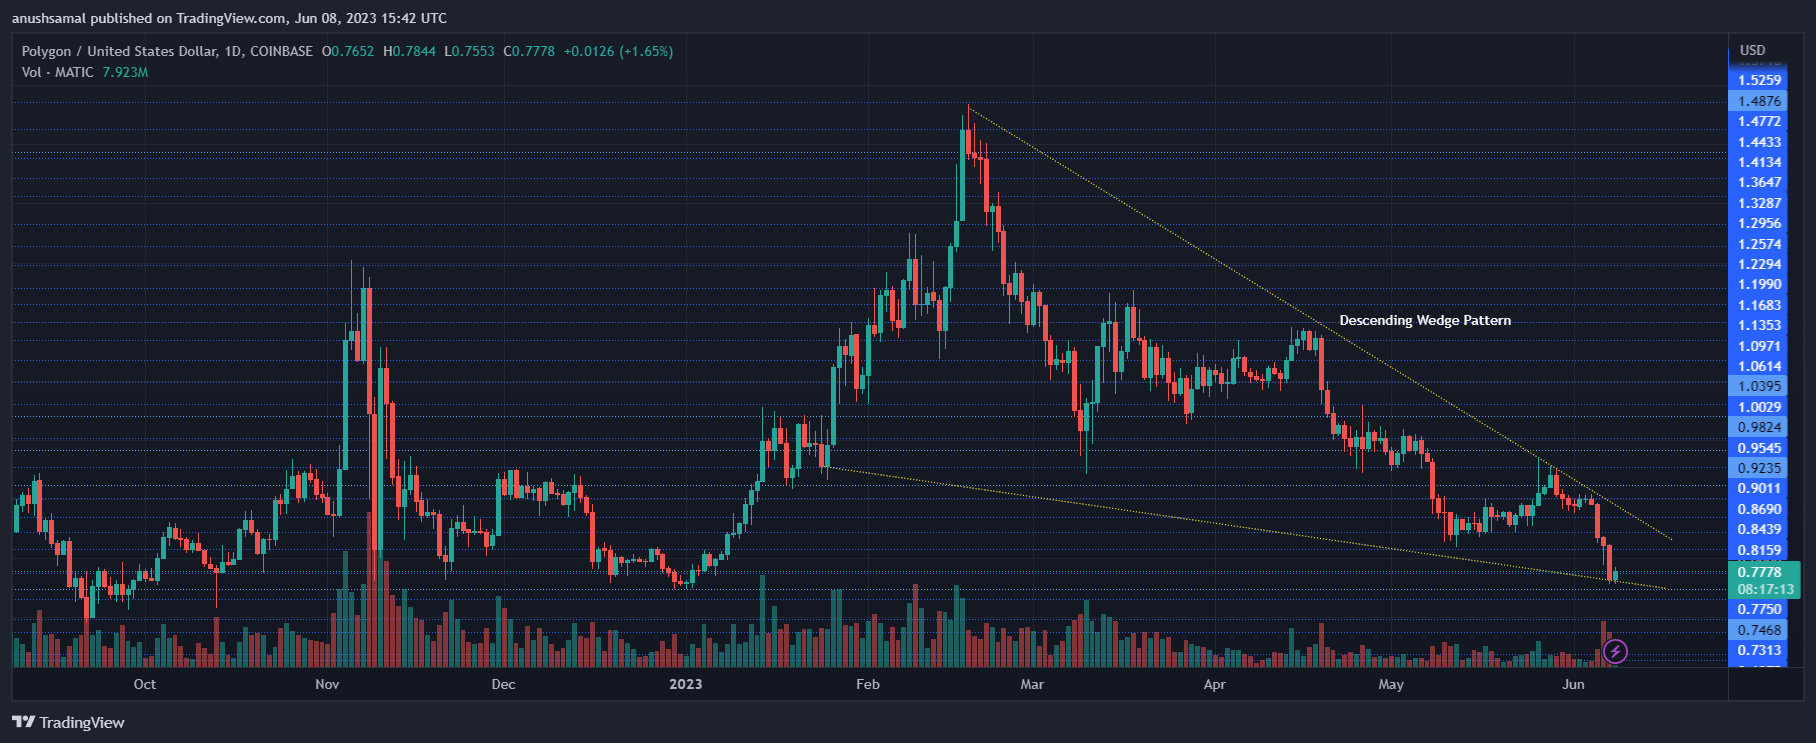 MATIC Price Shows Bullish Formation – What’s Next?